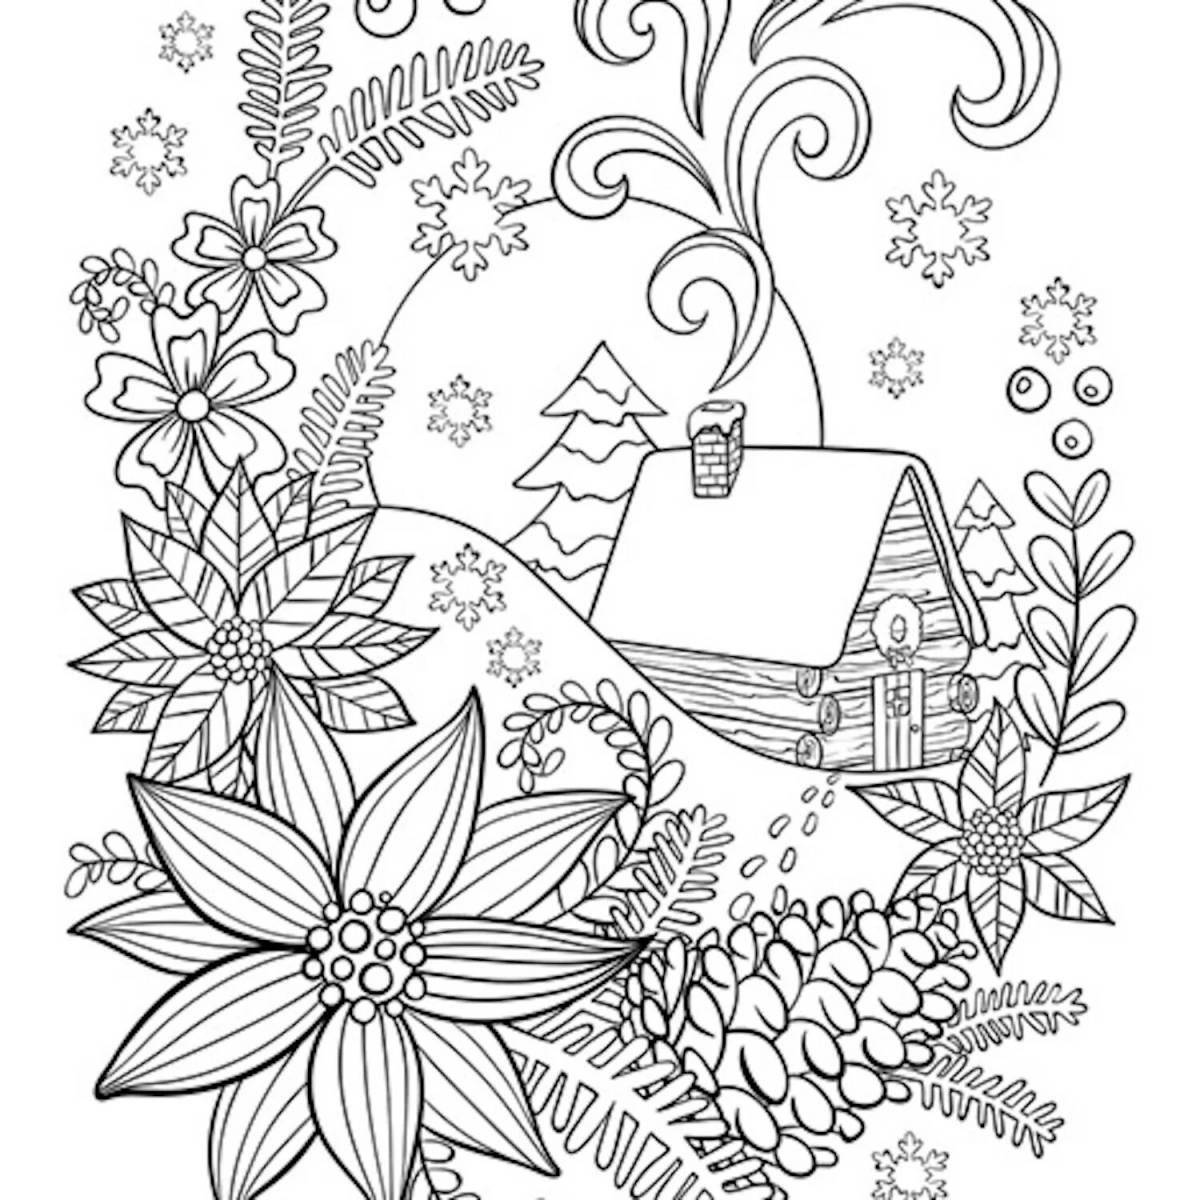 Fancy coloring antistress christmas